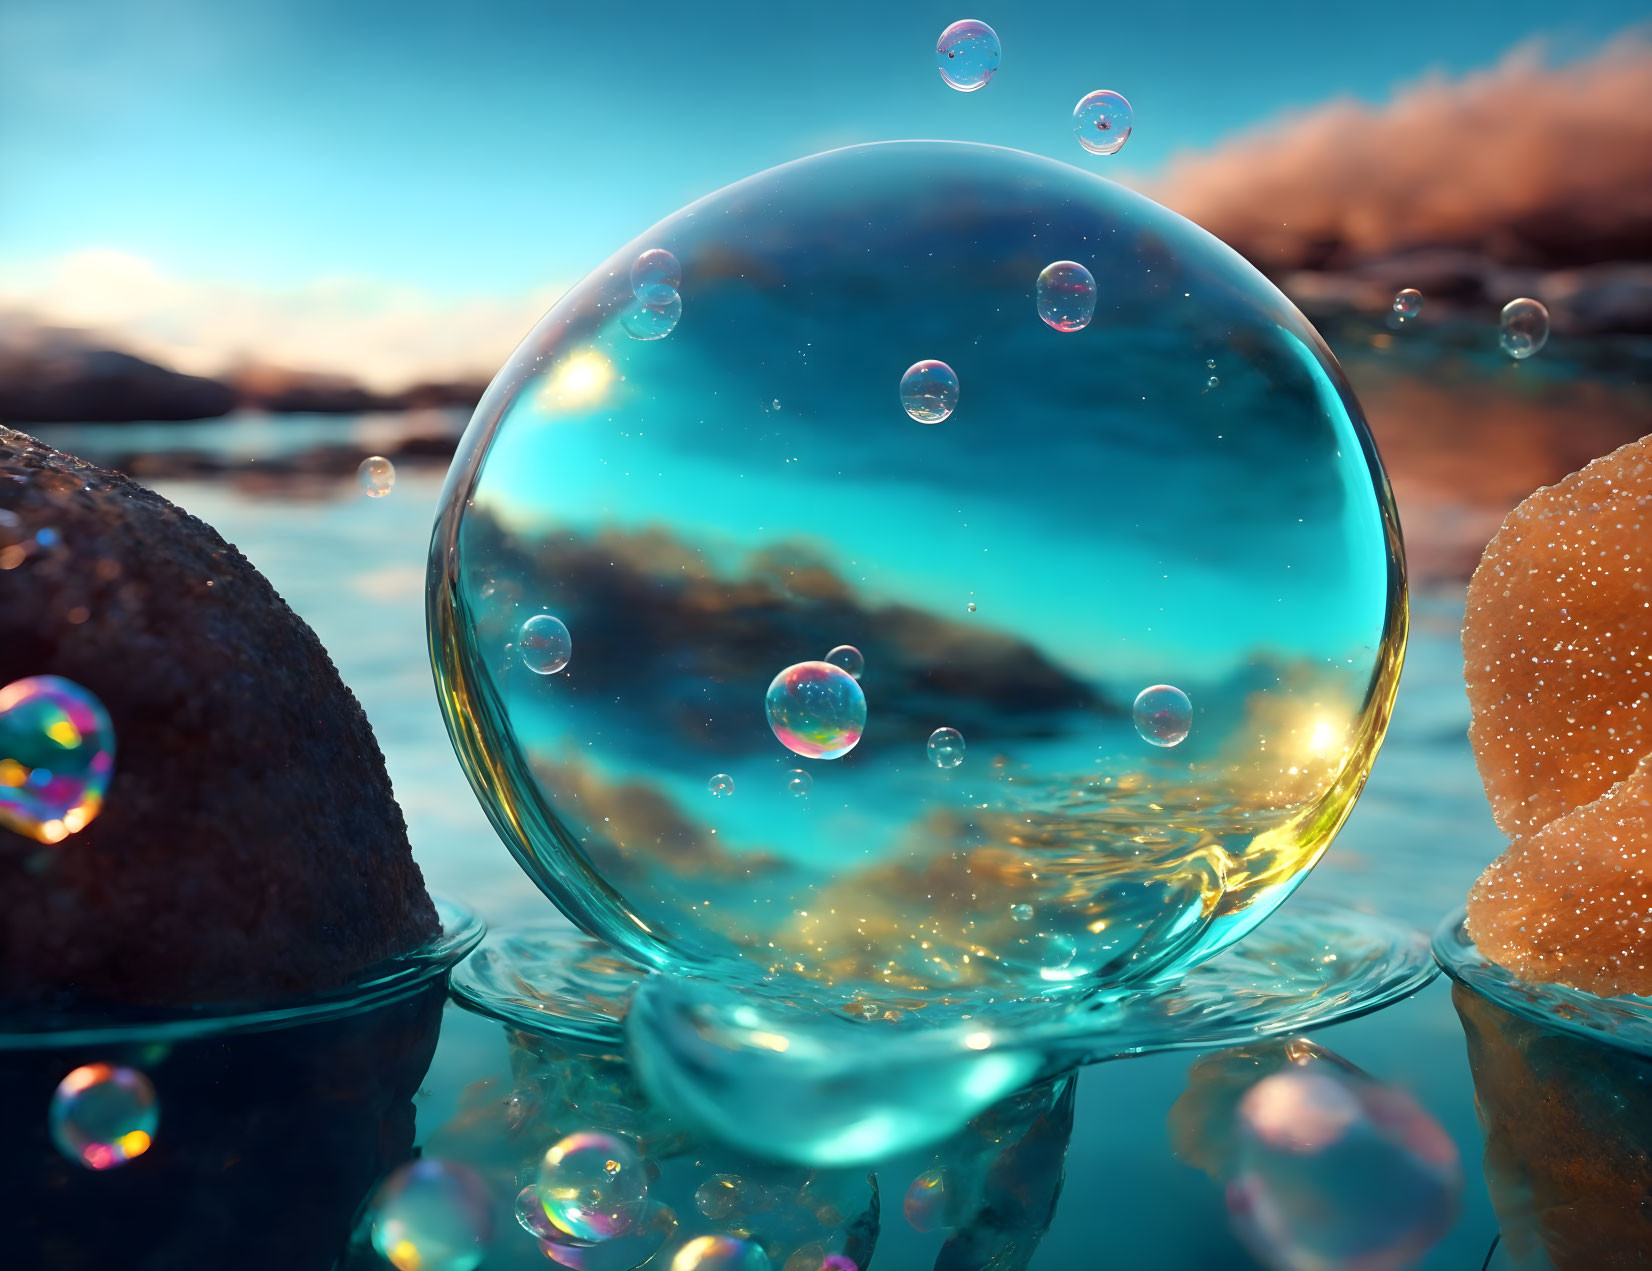 Worlds in bubbles